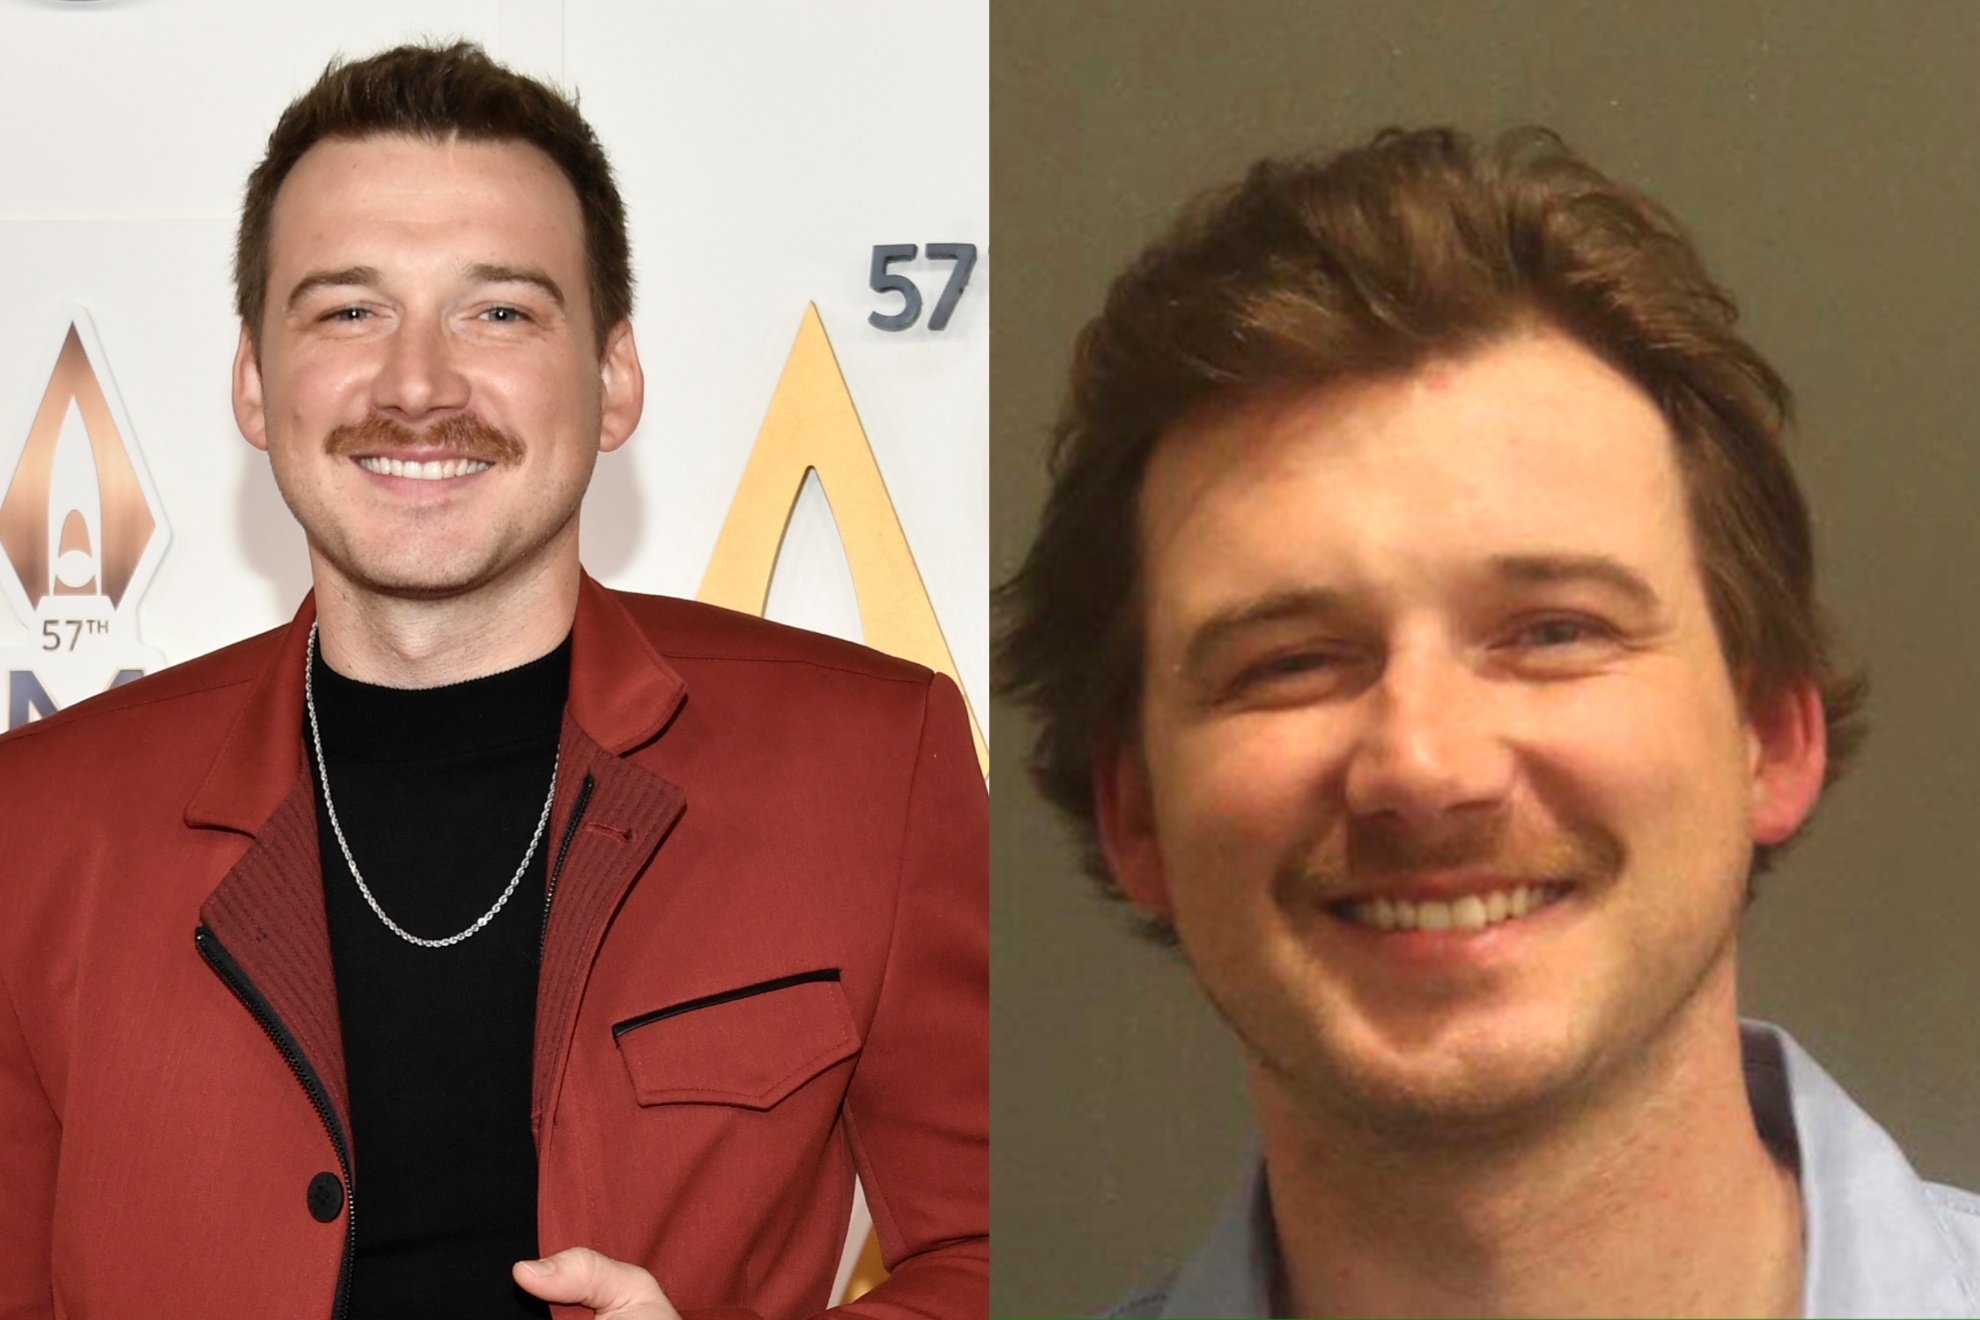 Country music star Morgan Wallen was arrested on Sunday in Nashville